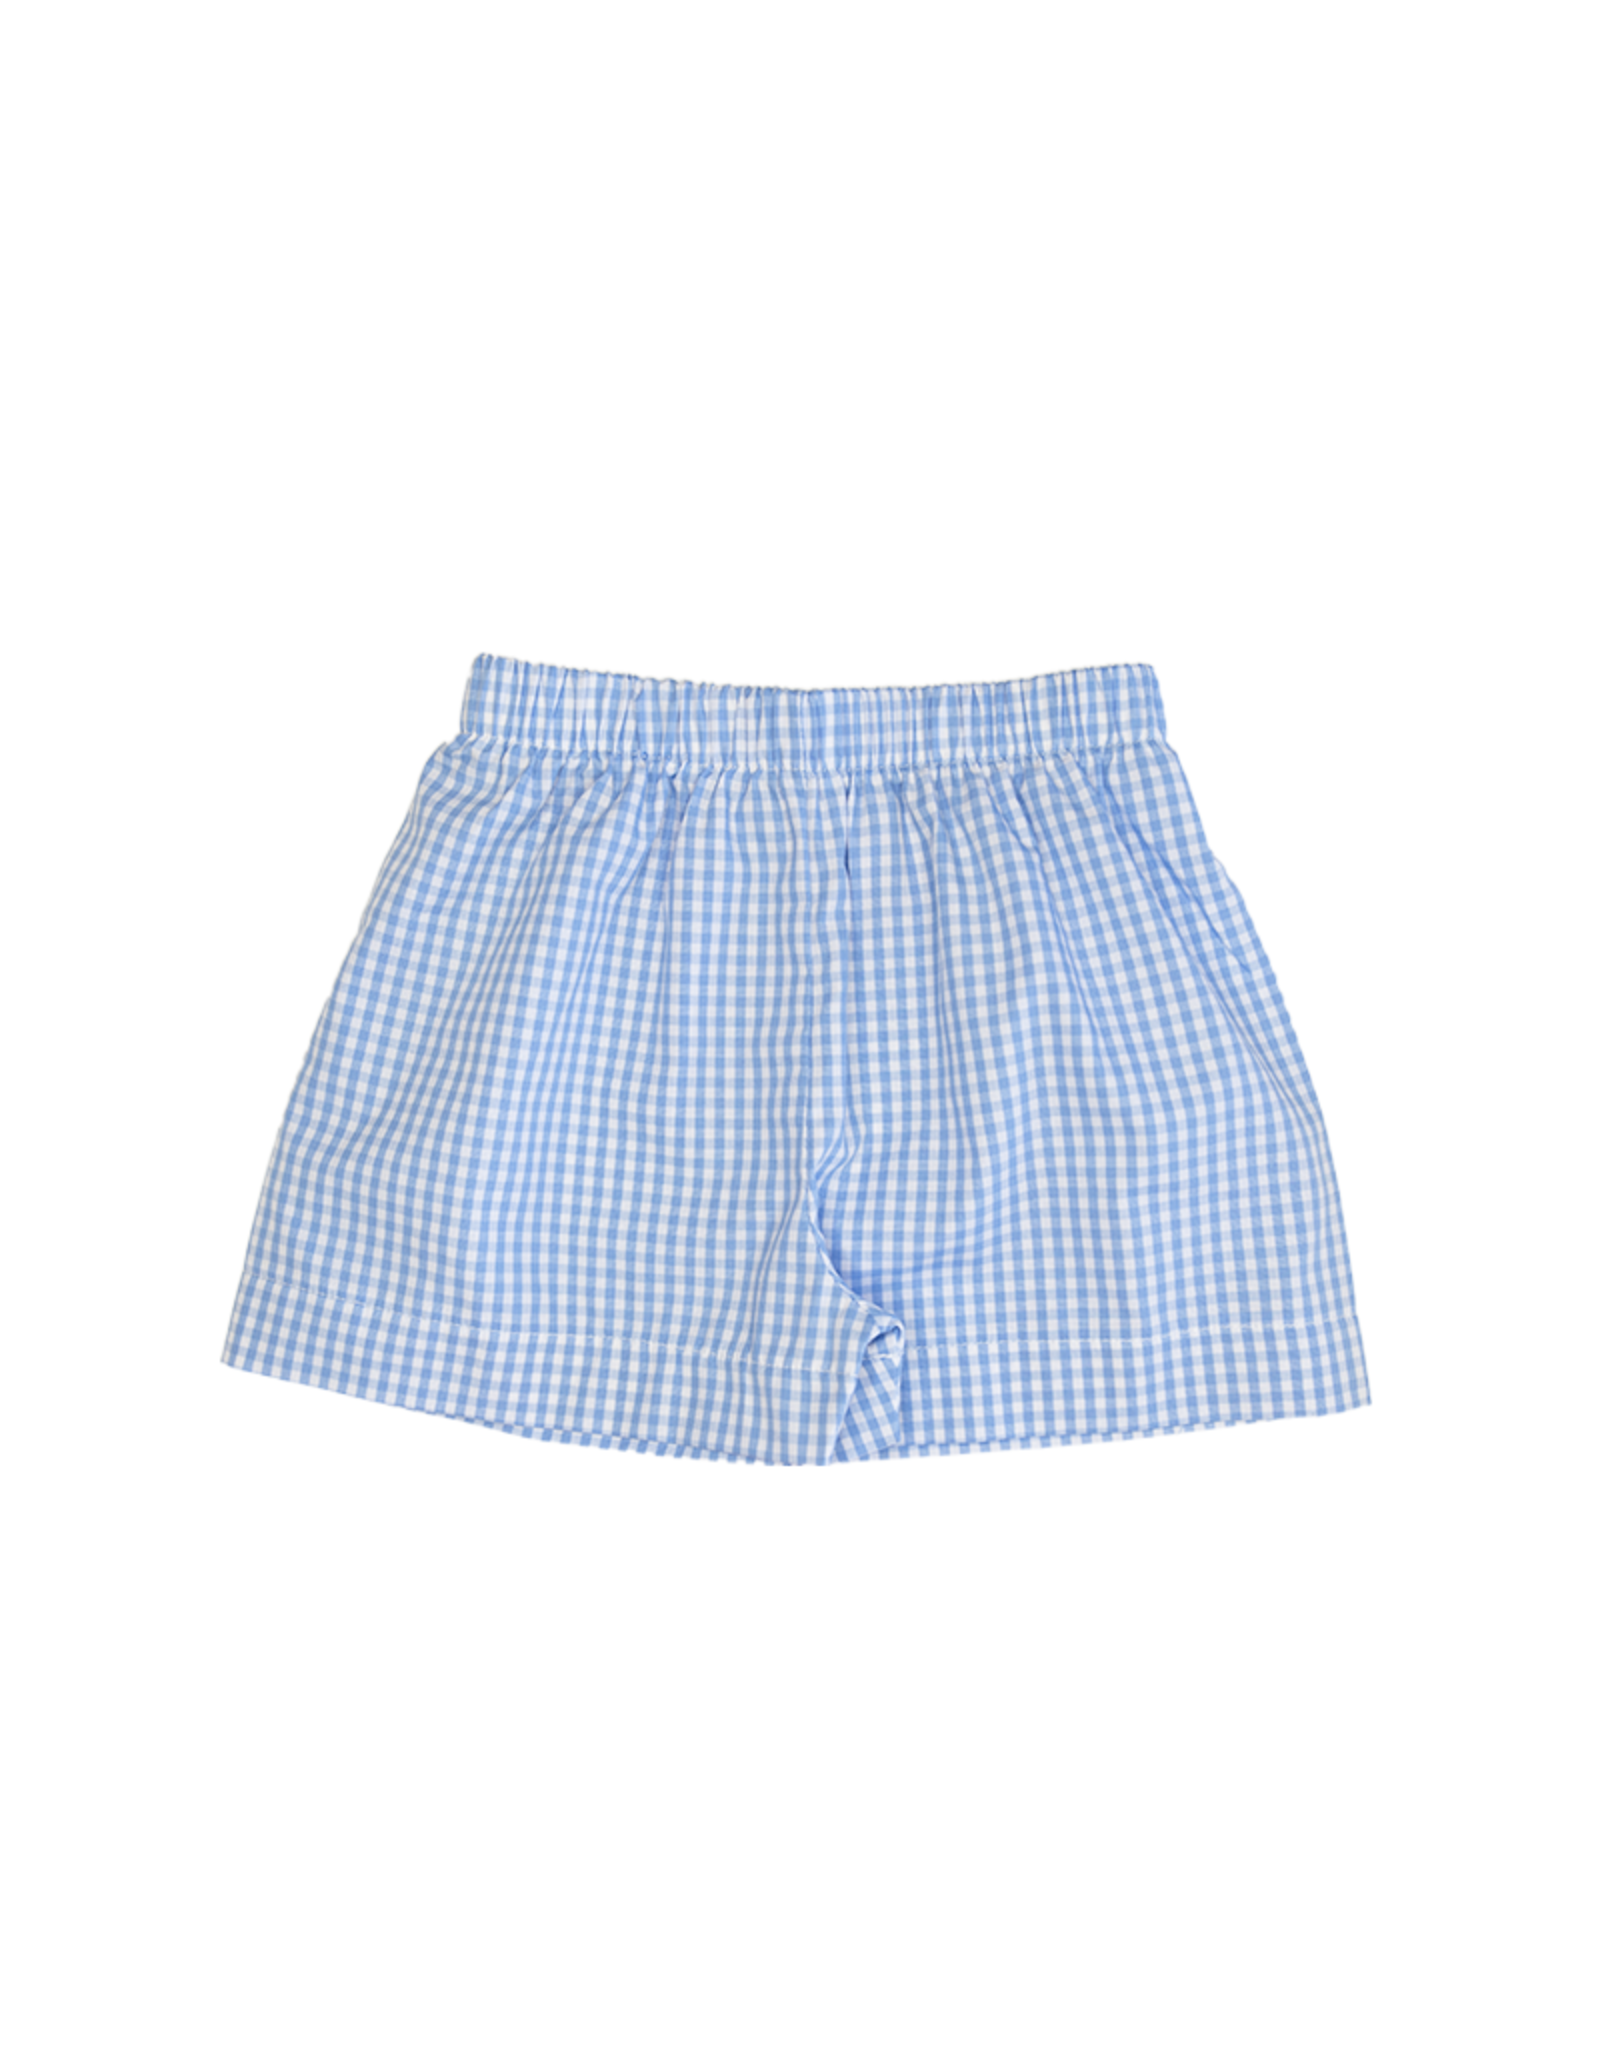 Delaney Collared Shirt Blue Check Short Set - Spoiled Sweet Boutique ...